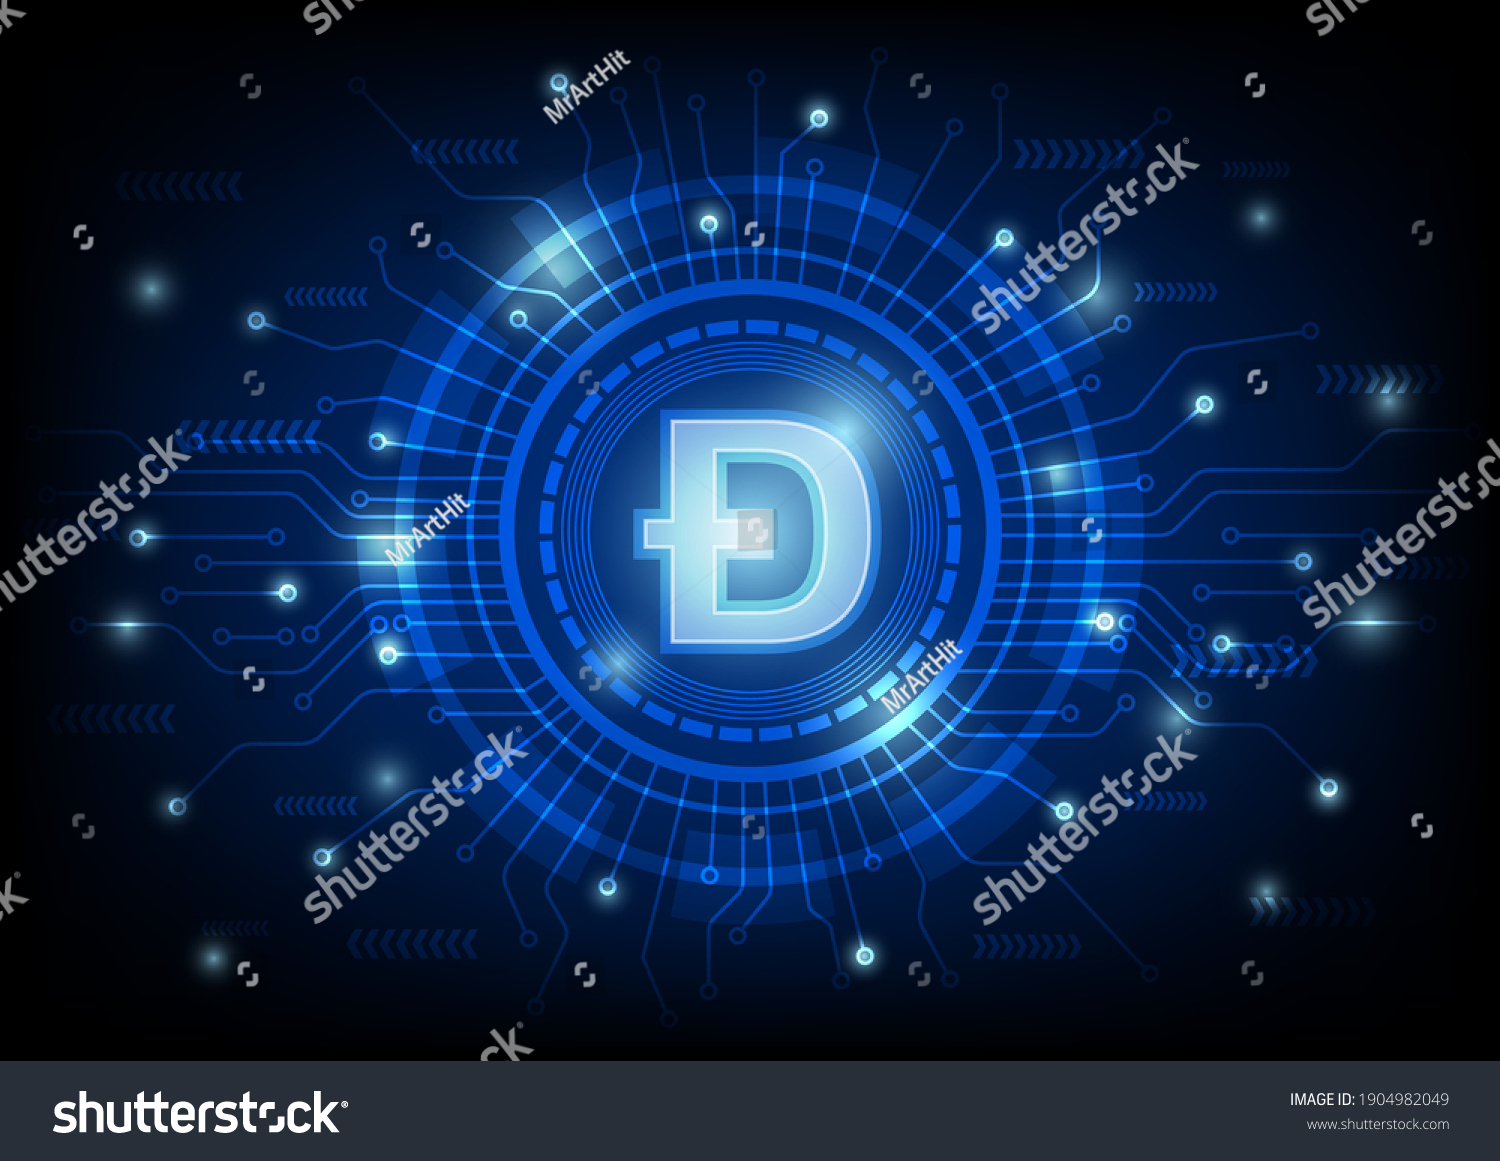 SVG of Cryptocurrency Dogecoin concept. Digital abstract technology blue background, Vector illustration svg